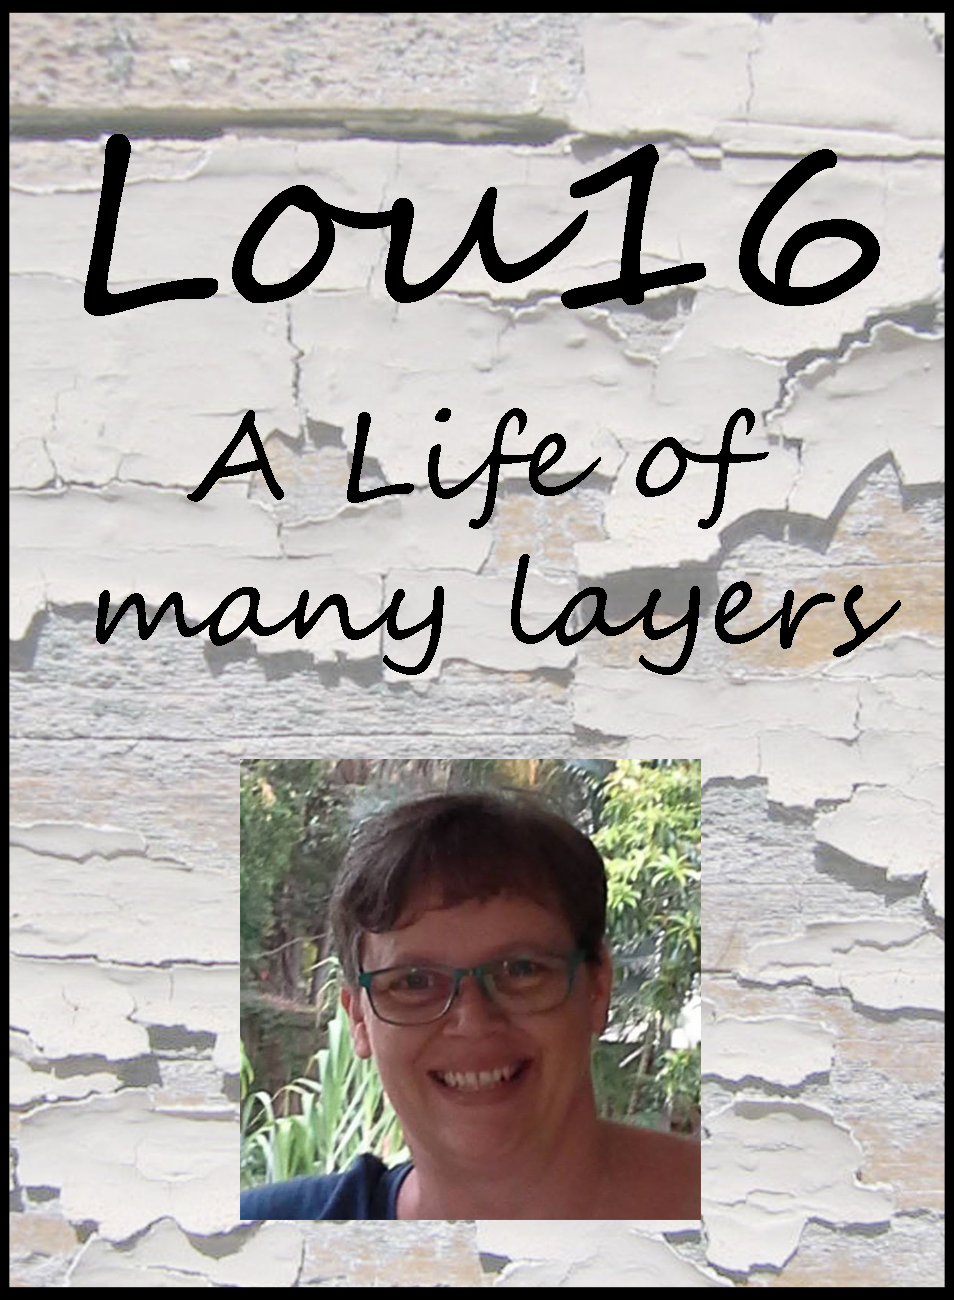 Lou16 - a life of many layers